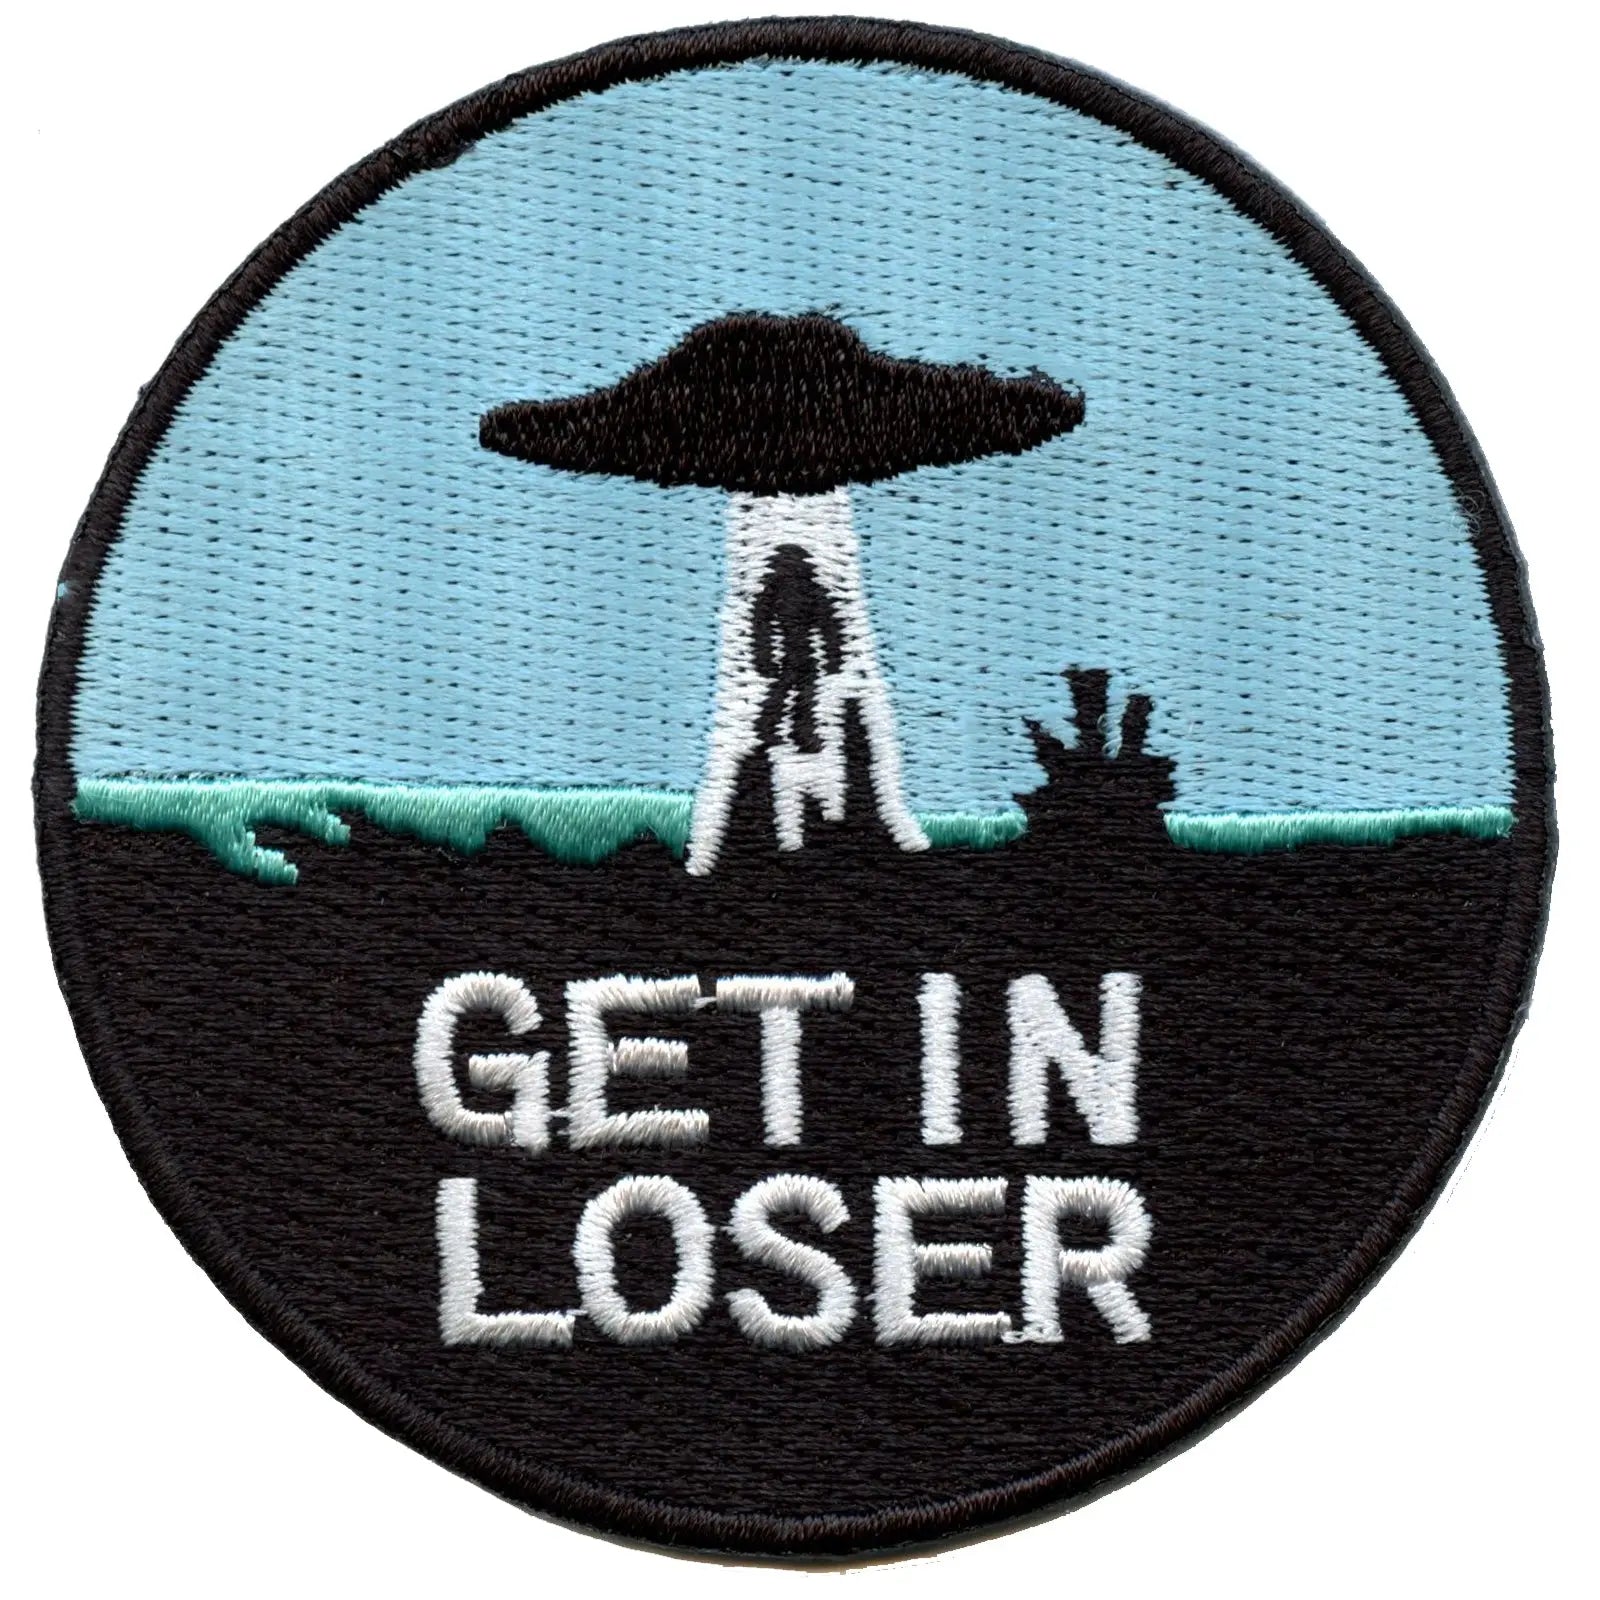 Get In Loser Alien Abduction Embroidered Iron On Patch 